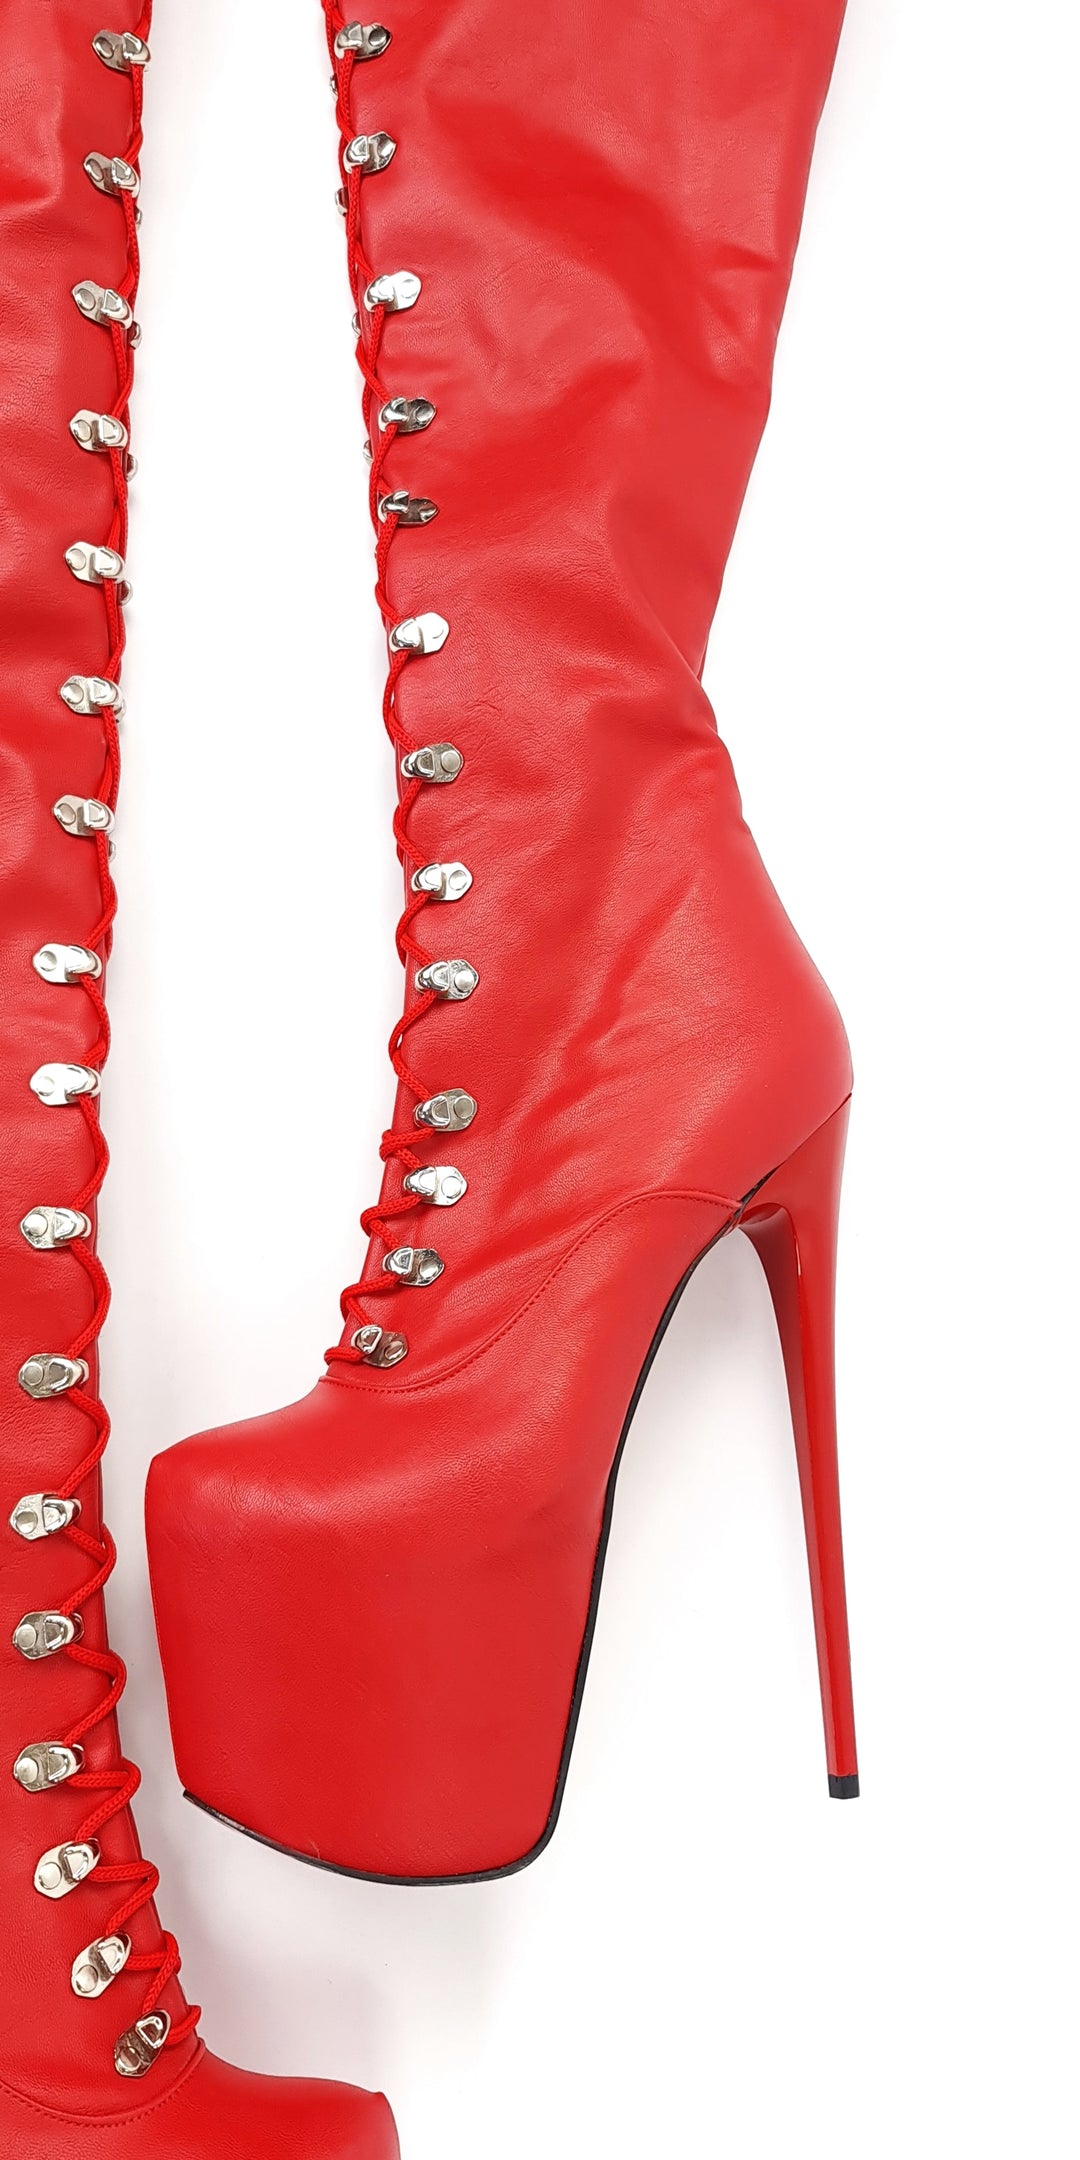 red-lace-up-thigh-high-military-style-high-heel-boots-tajna-club-shoe-bondage-fetish